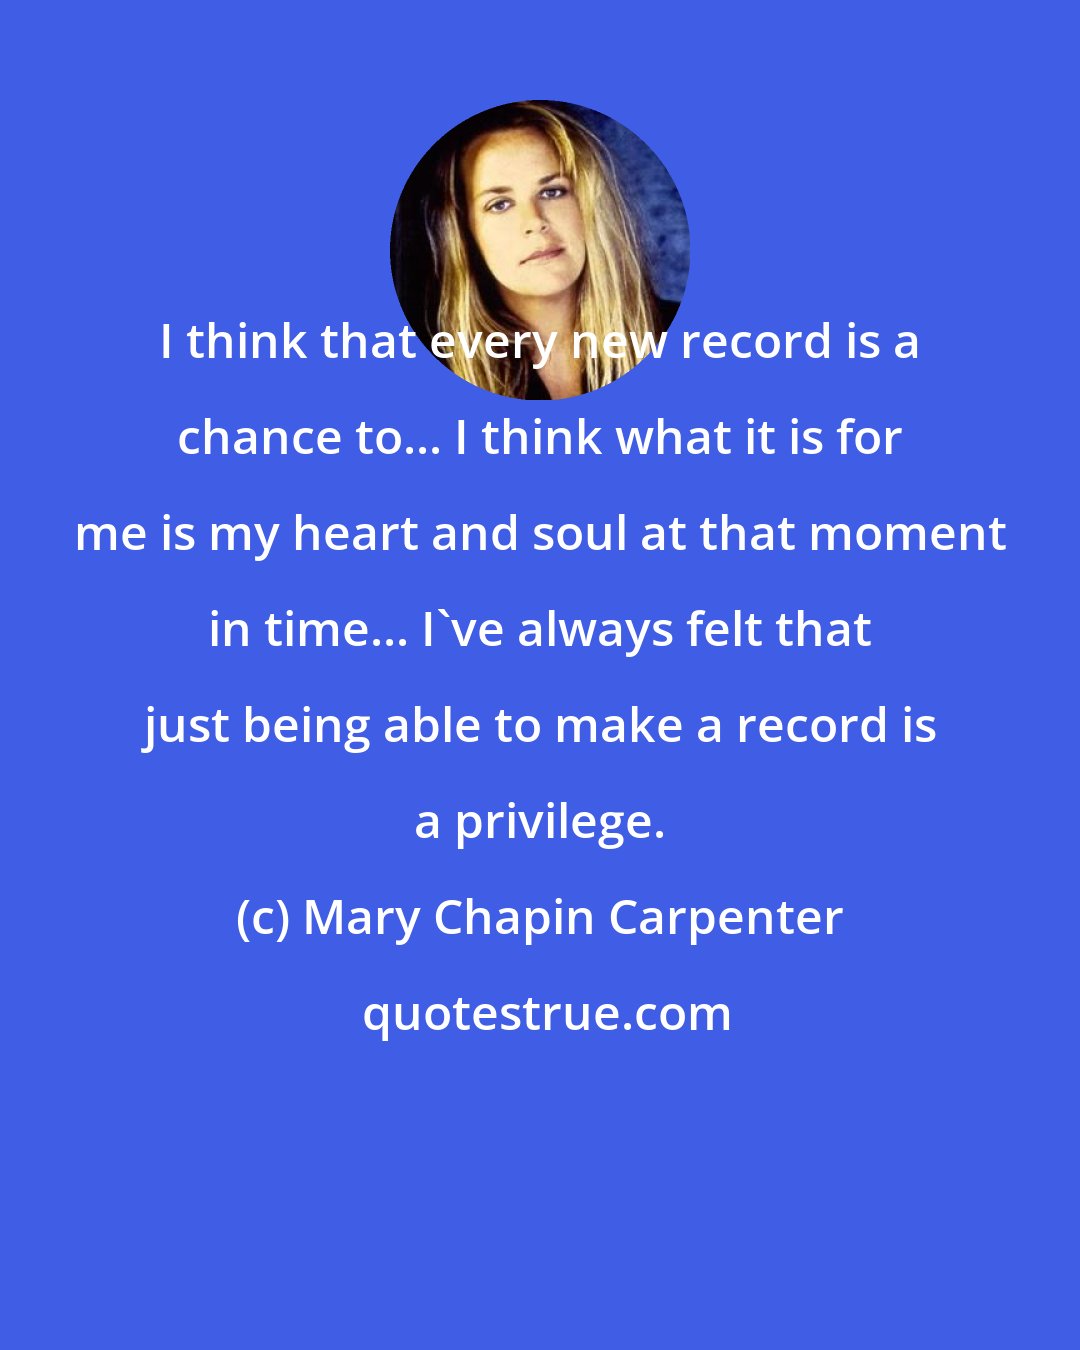 Mary Chapin Carpenter: I think that every new record is a chance to... I think what it is for me is my heart and soul at that moment in time... I've always felt that just being able to make a record is a privilege.